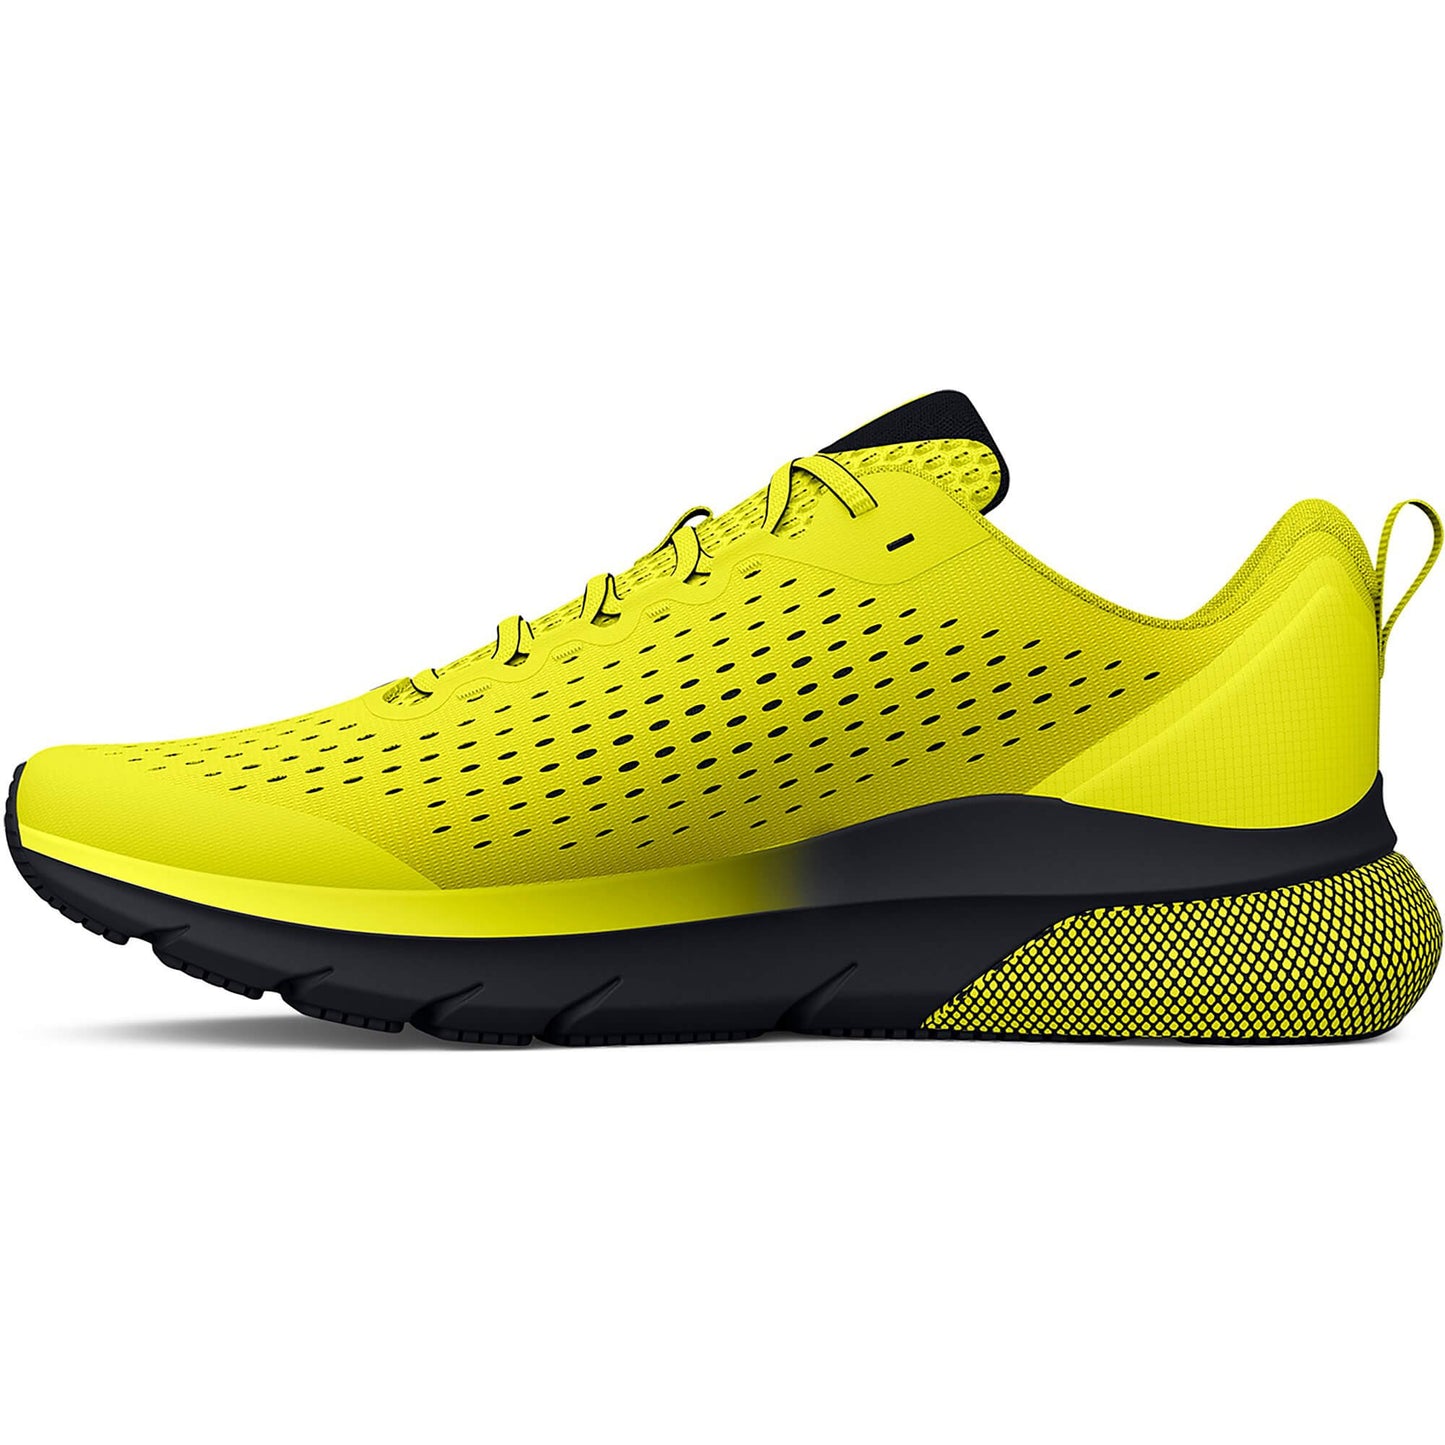 Under Armour Men's UA HOVR™ Turbulence Running Shoes Yellow